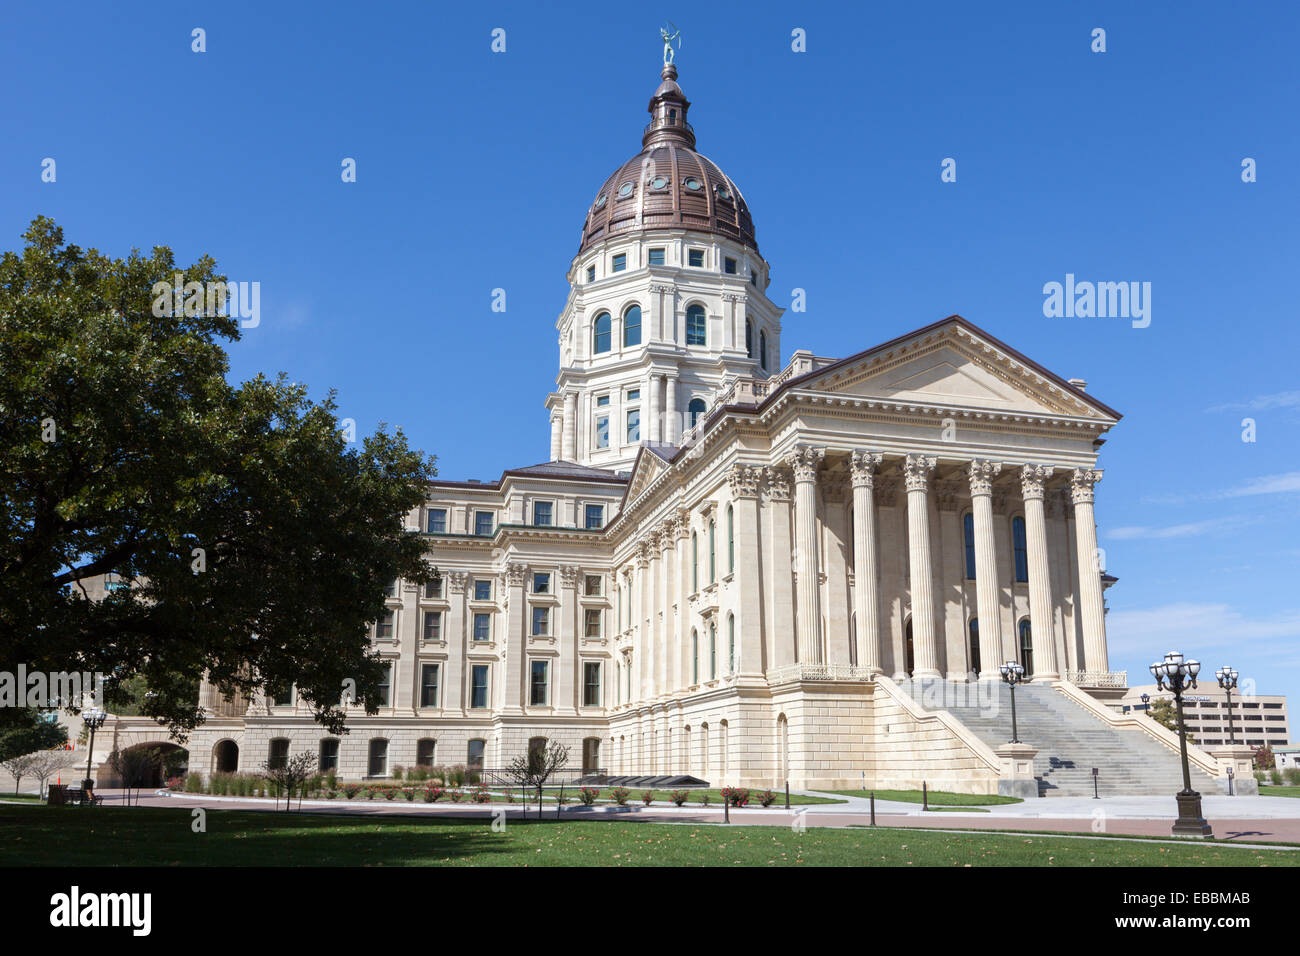 Kansas State Capitol building, Topeka, completed 1903, architect John Haskell, limestone, copper dome, taller than US Capitol. Stock Photo